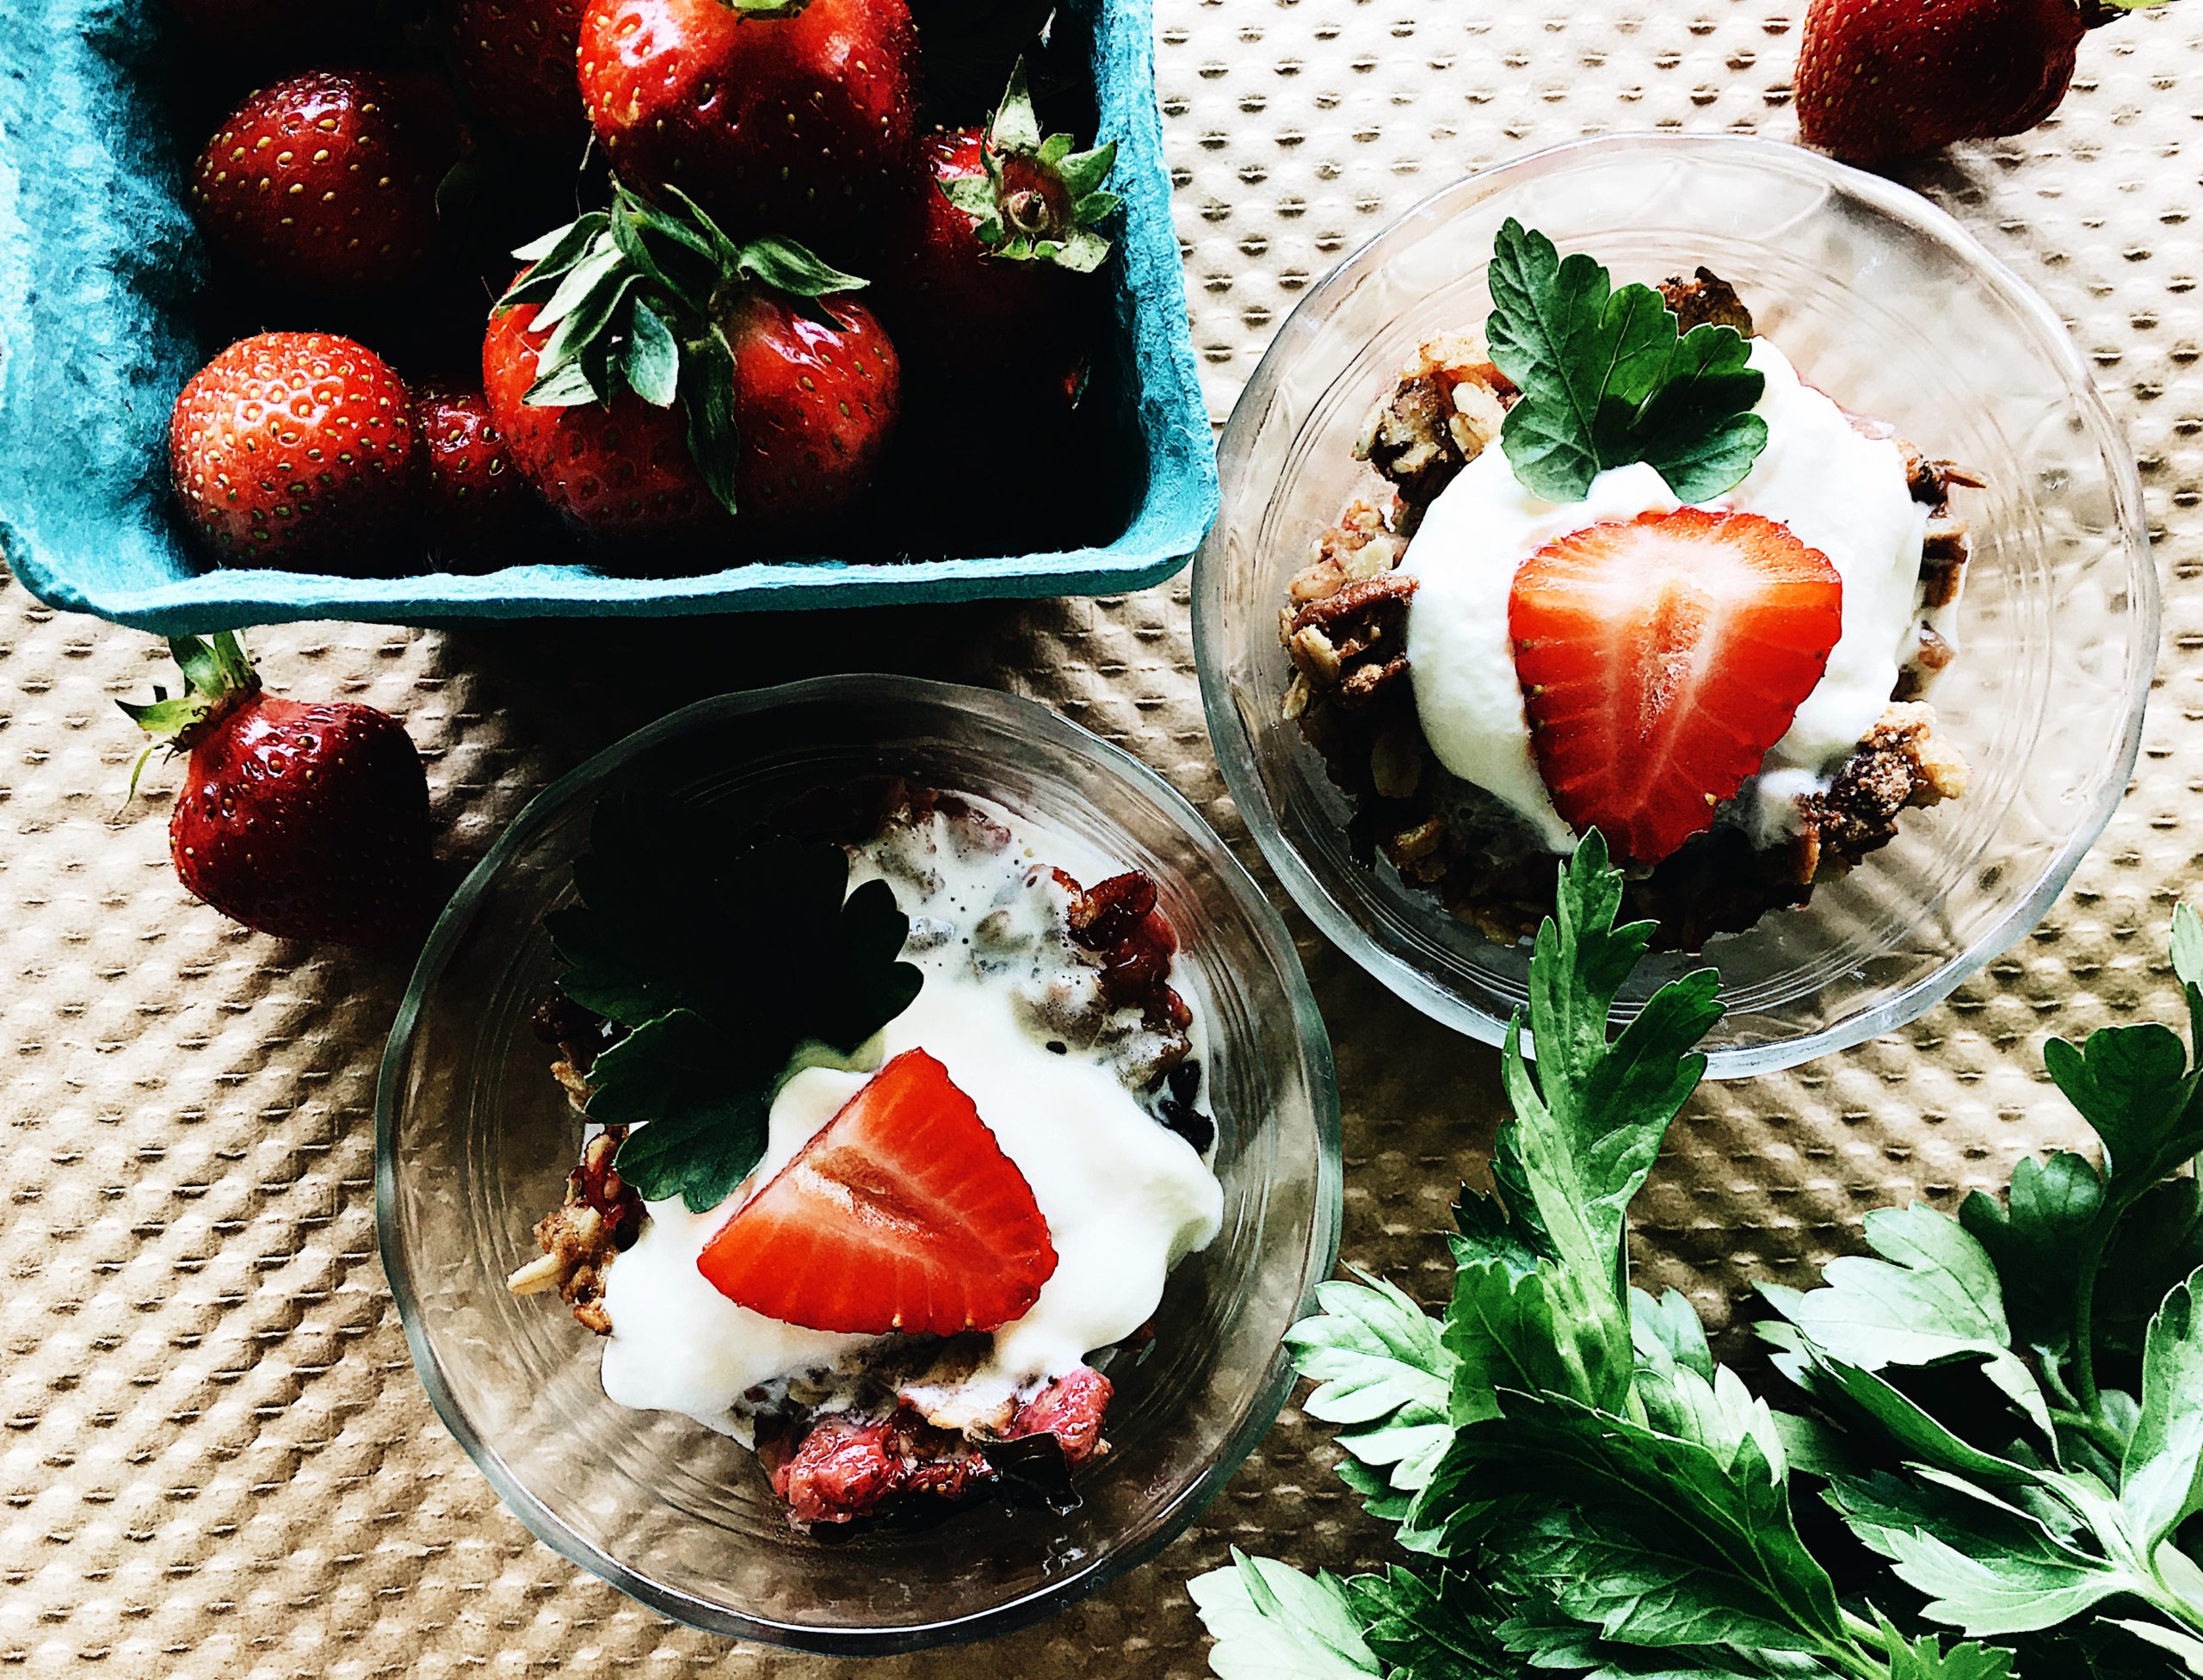 Baked Strawberry, Rhubarb and Parsley Crisp. Recipe by Alysha Melnyk with Taproot Farm, PA.